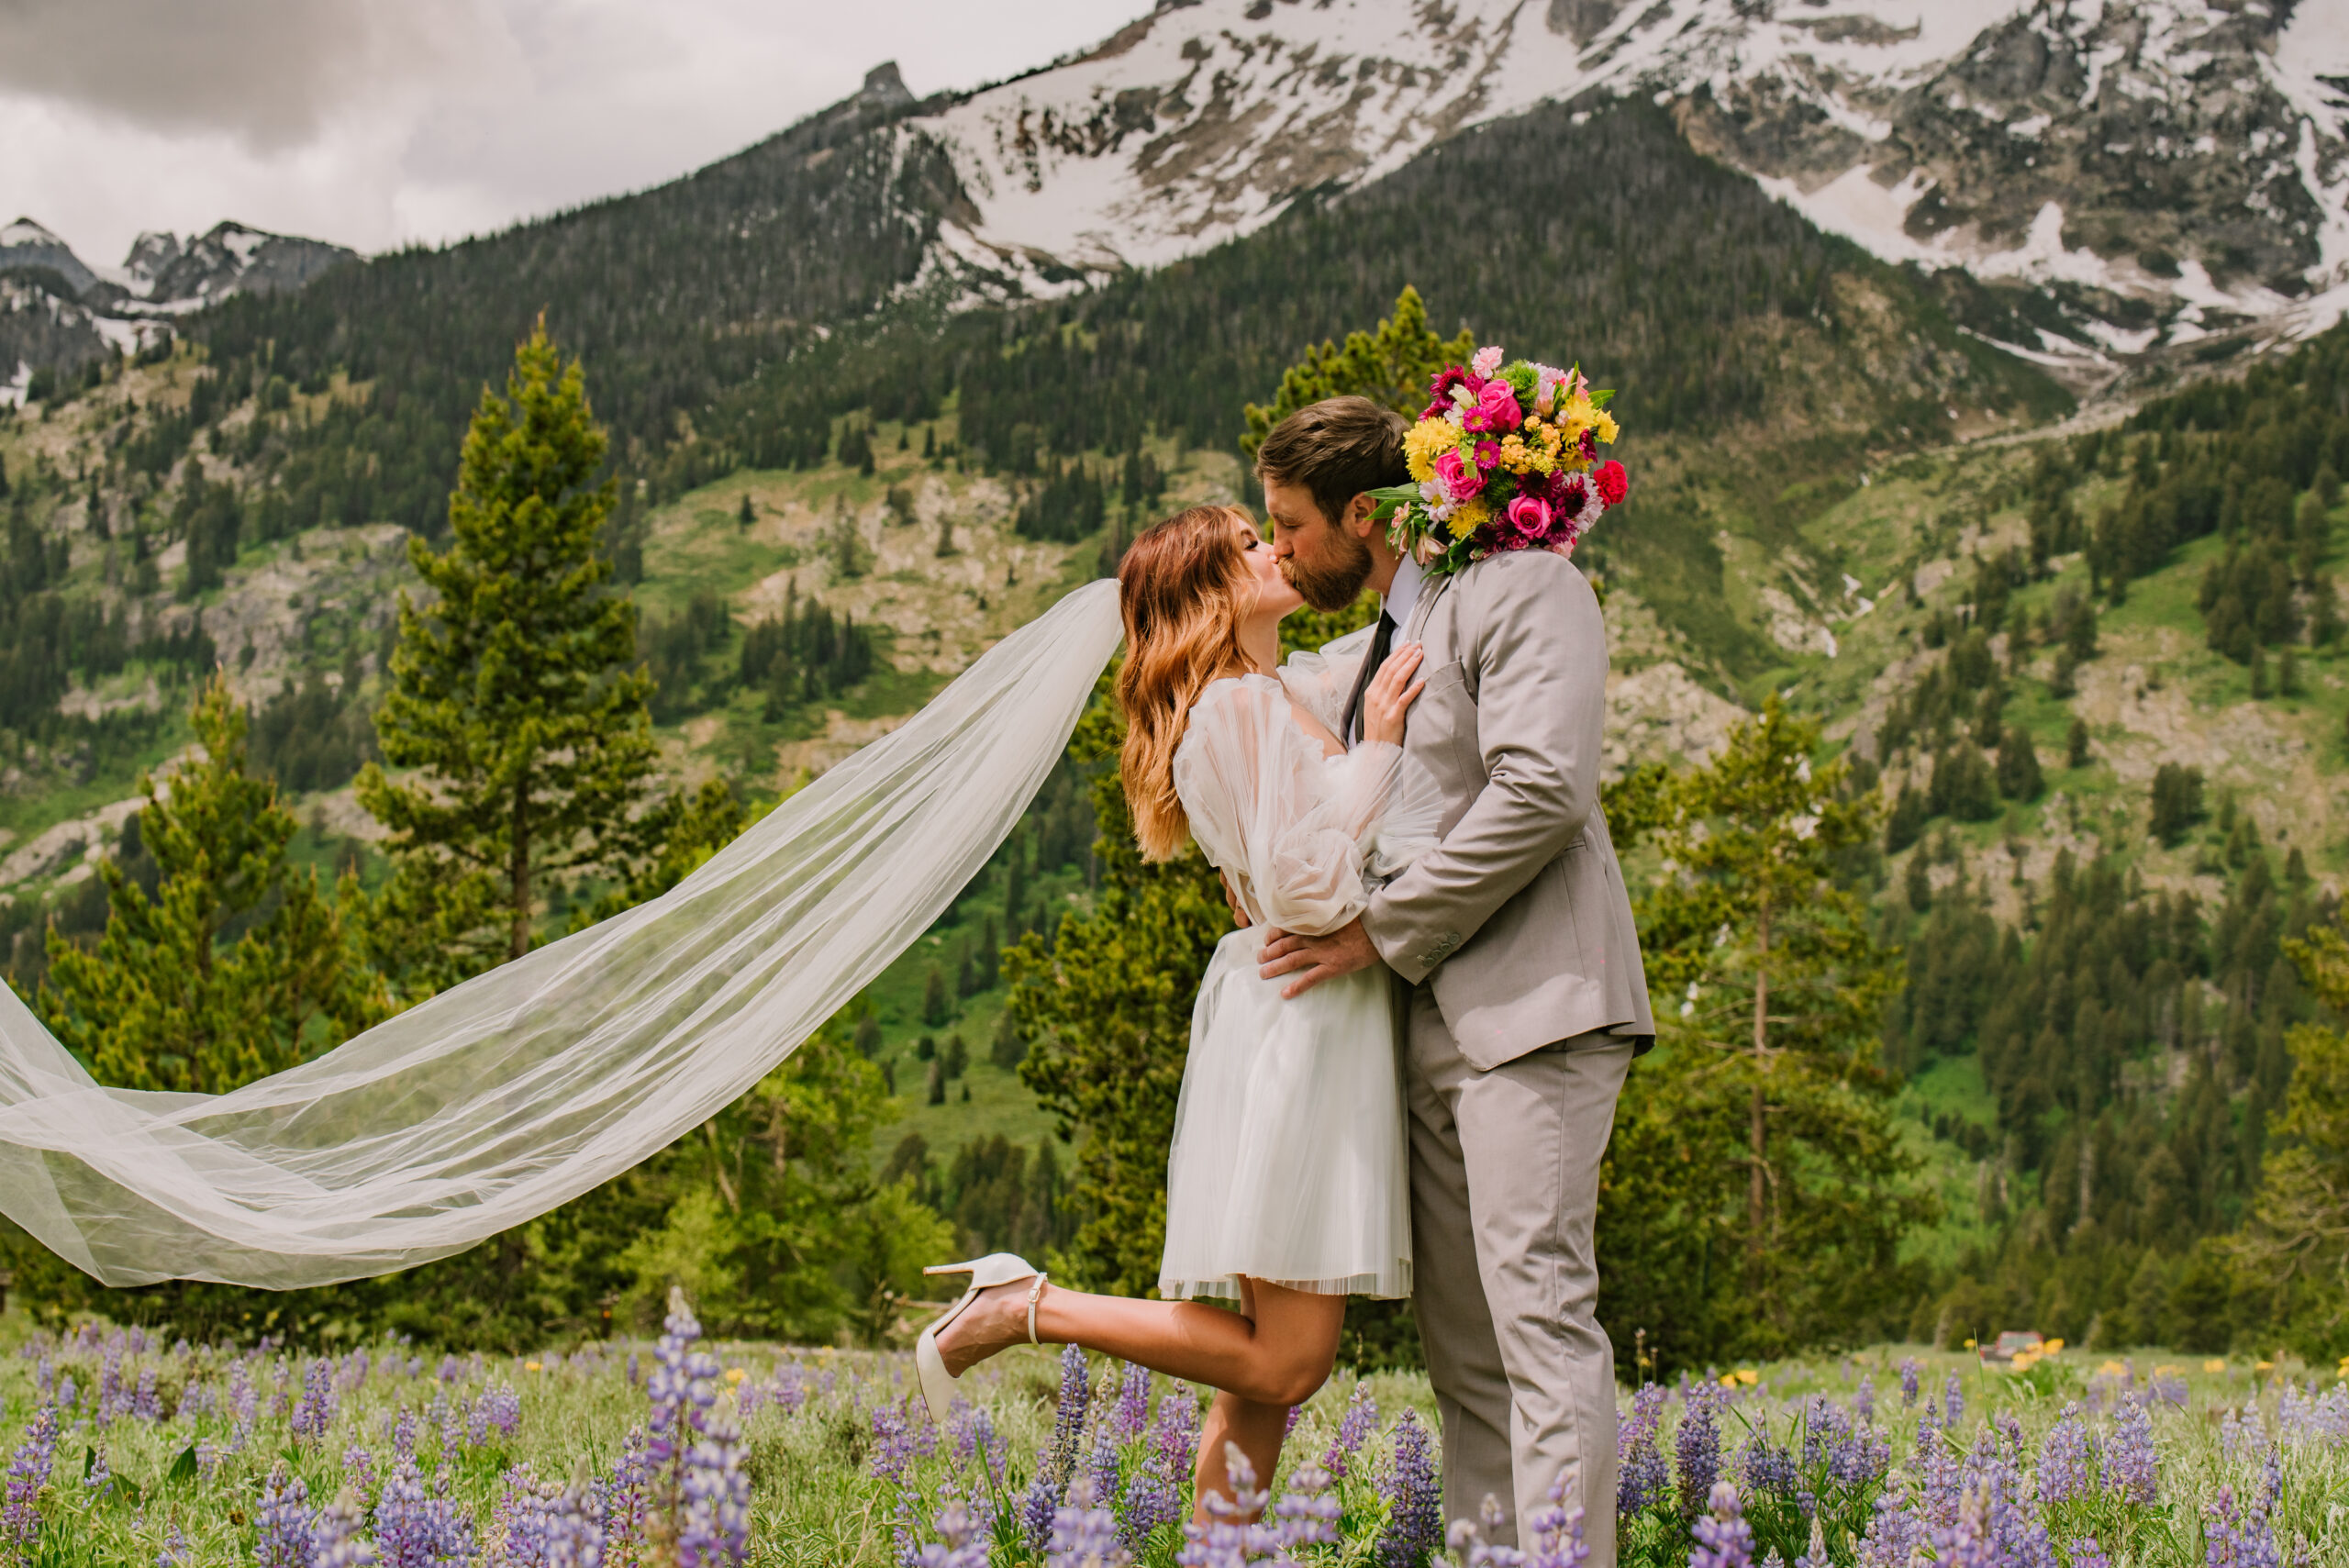 Bride in short dress and long veil kisses her groom in front of green mountain. Her bright colored bouquet is behind his head and her foot is lifted up.